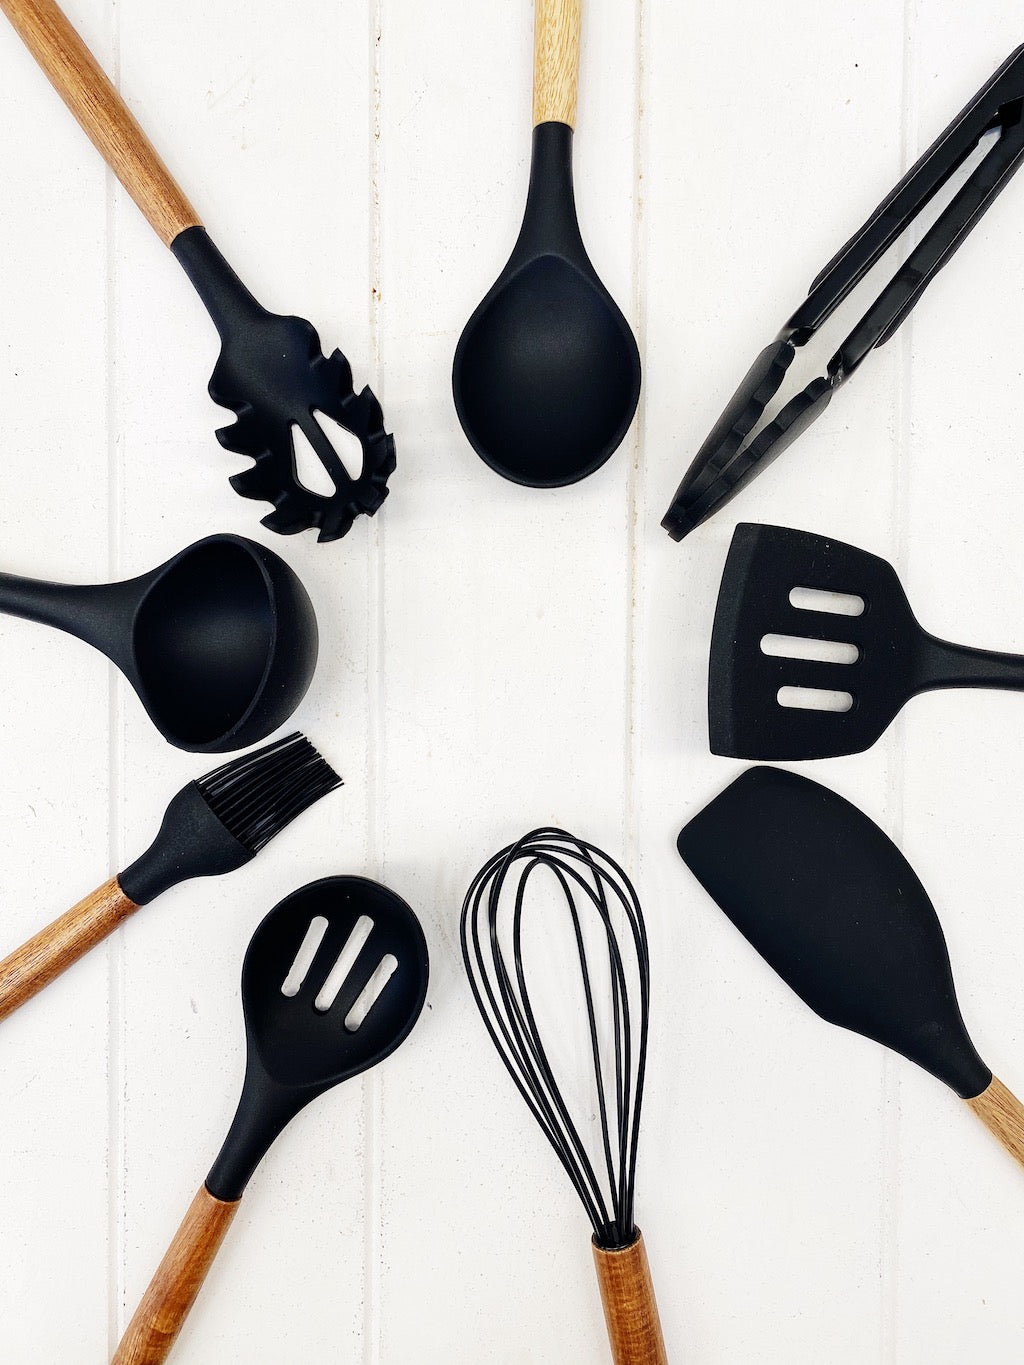 Bialetti St Clare Acacia Handle Silicone Spaghetti Spoon - Kitchen Utensils - black silicone head - heat resistant up to 500degrees - solid acacia handle |Bliss Gifts &amp; Homewares - Unit 8, 259 Princes Hwy Ulladulla - Shop Online &amp; In store - 0427795959, 44541523 - Australia wide shipping